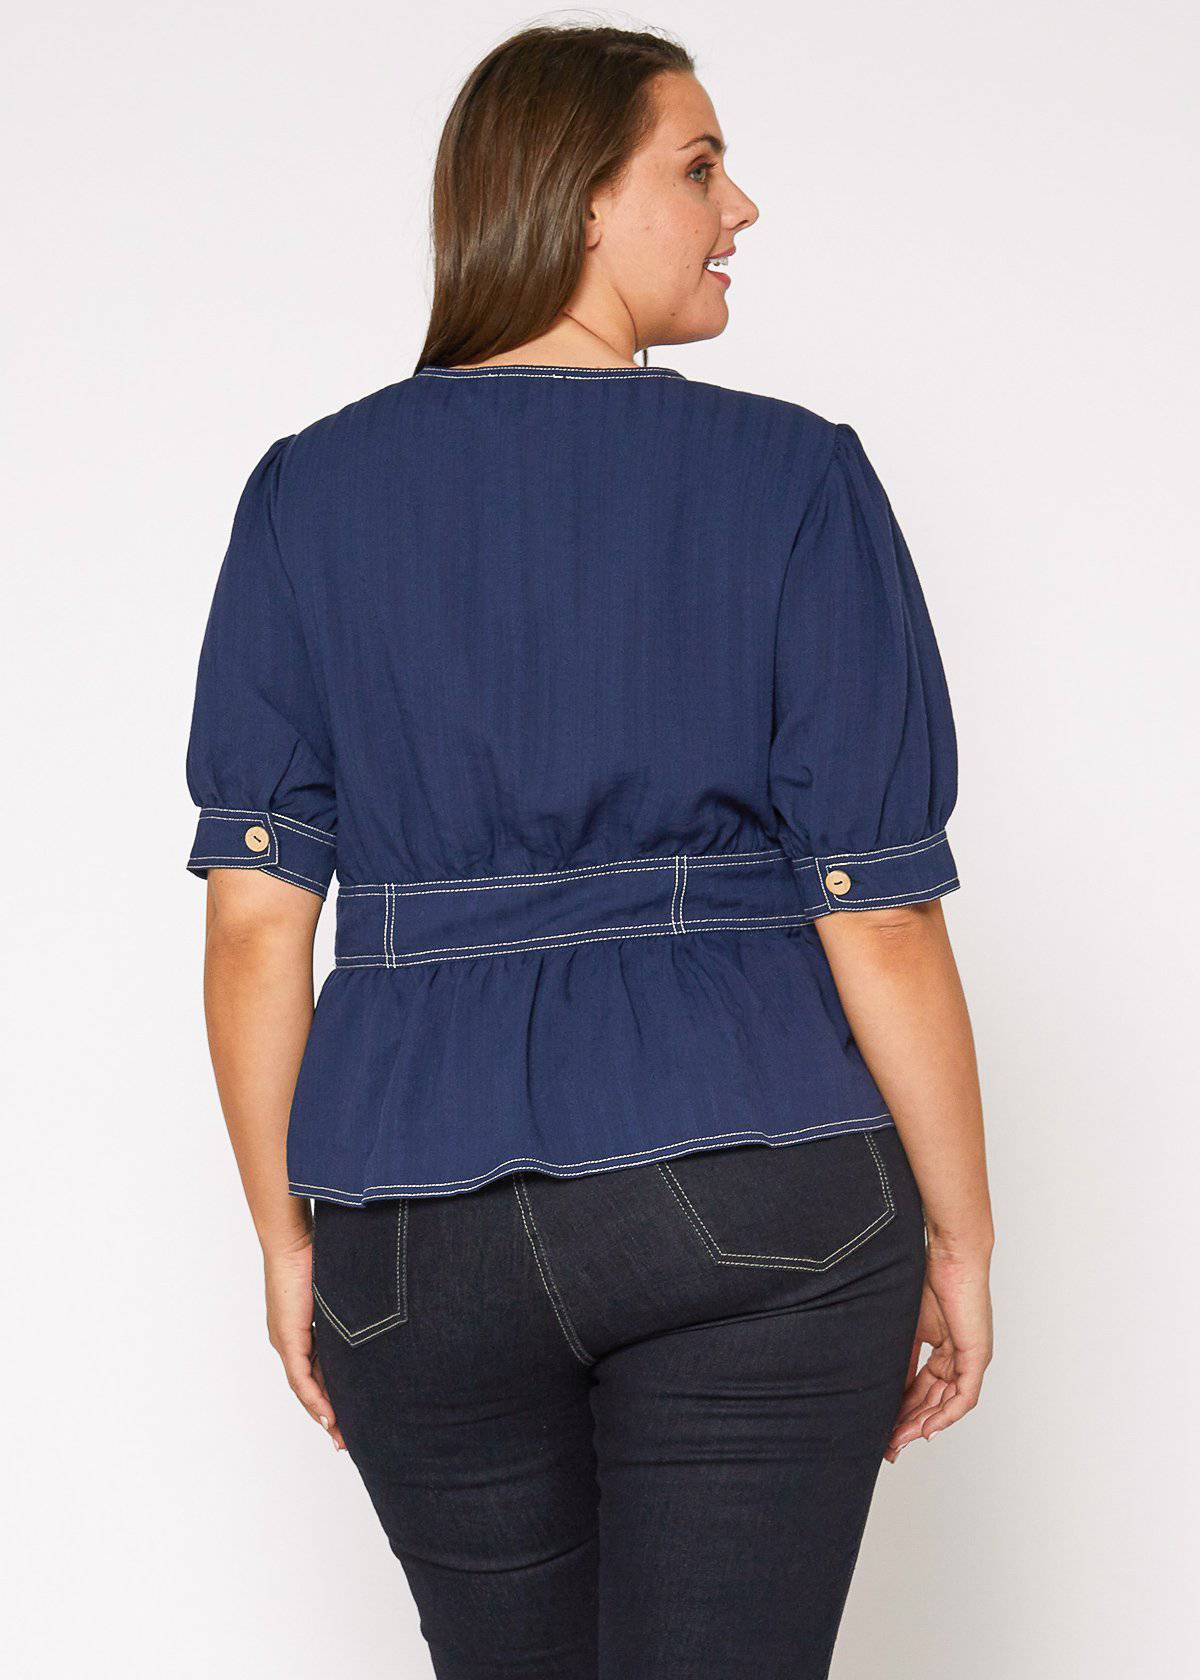 Plus Size Puff Shoulder Button Front Peplum Top in Navy by Shop at Konus